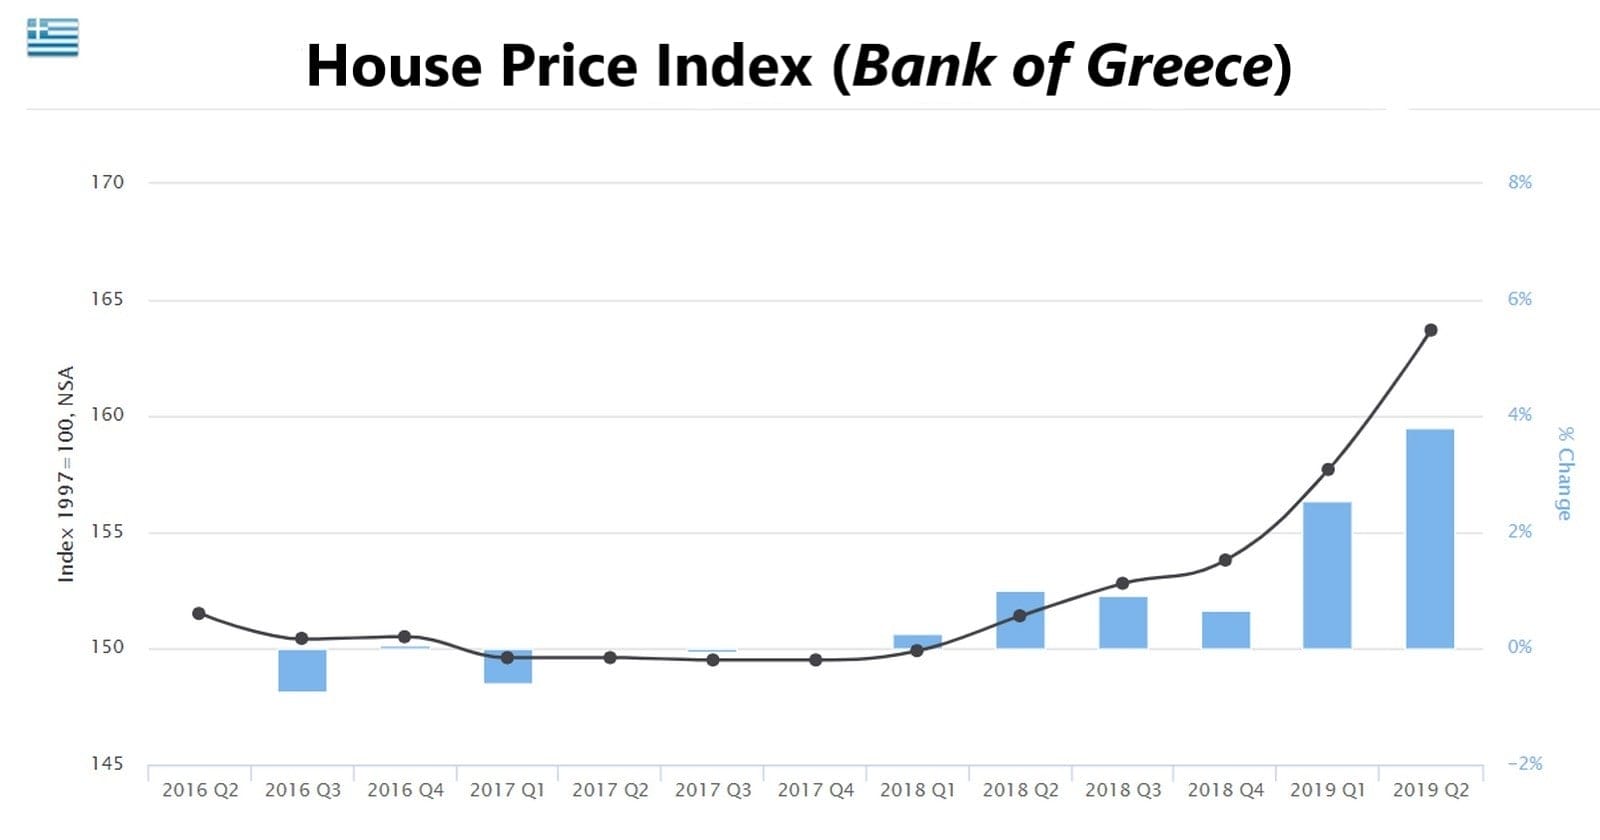 House Price Index Evolution - Bank of Greece